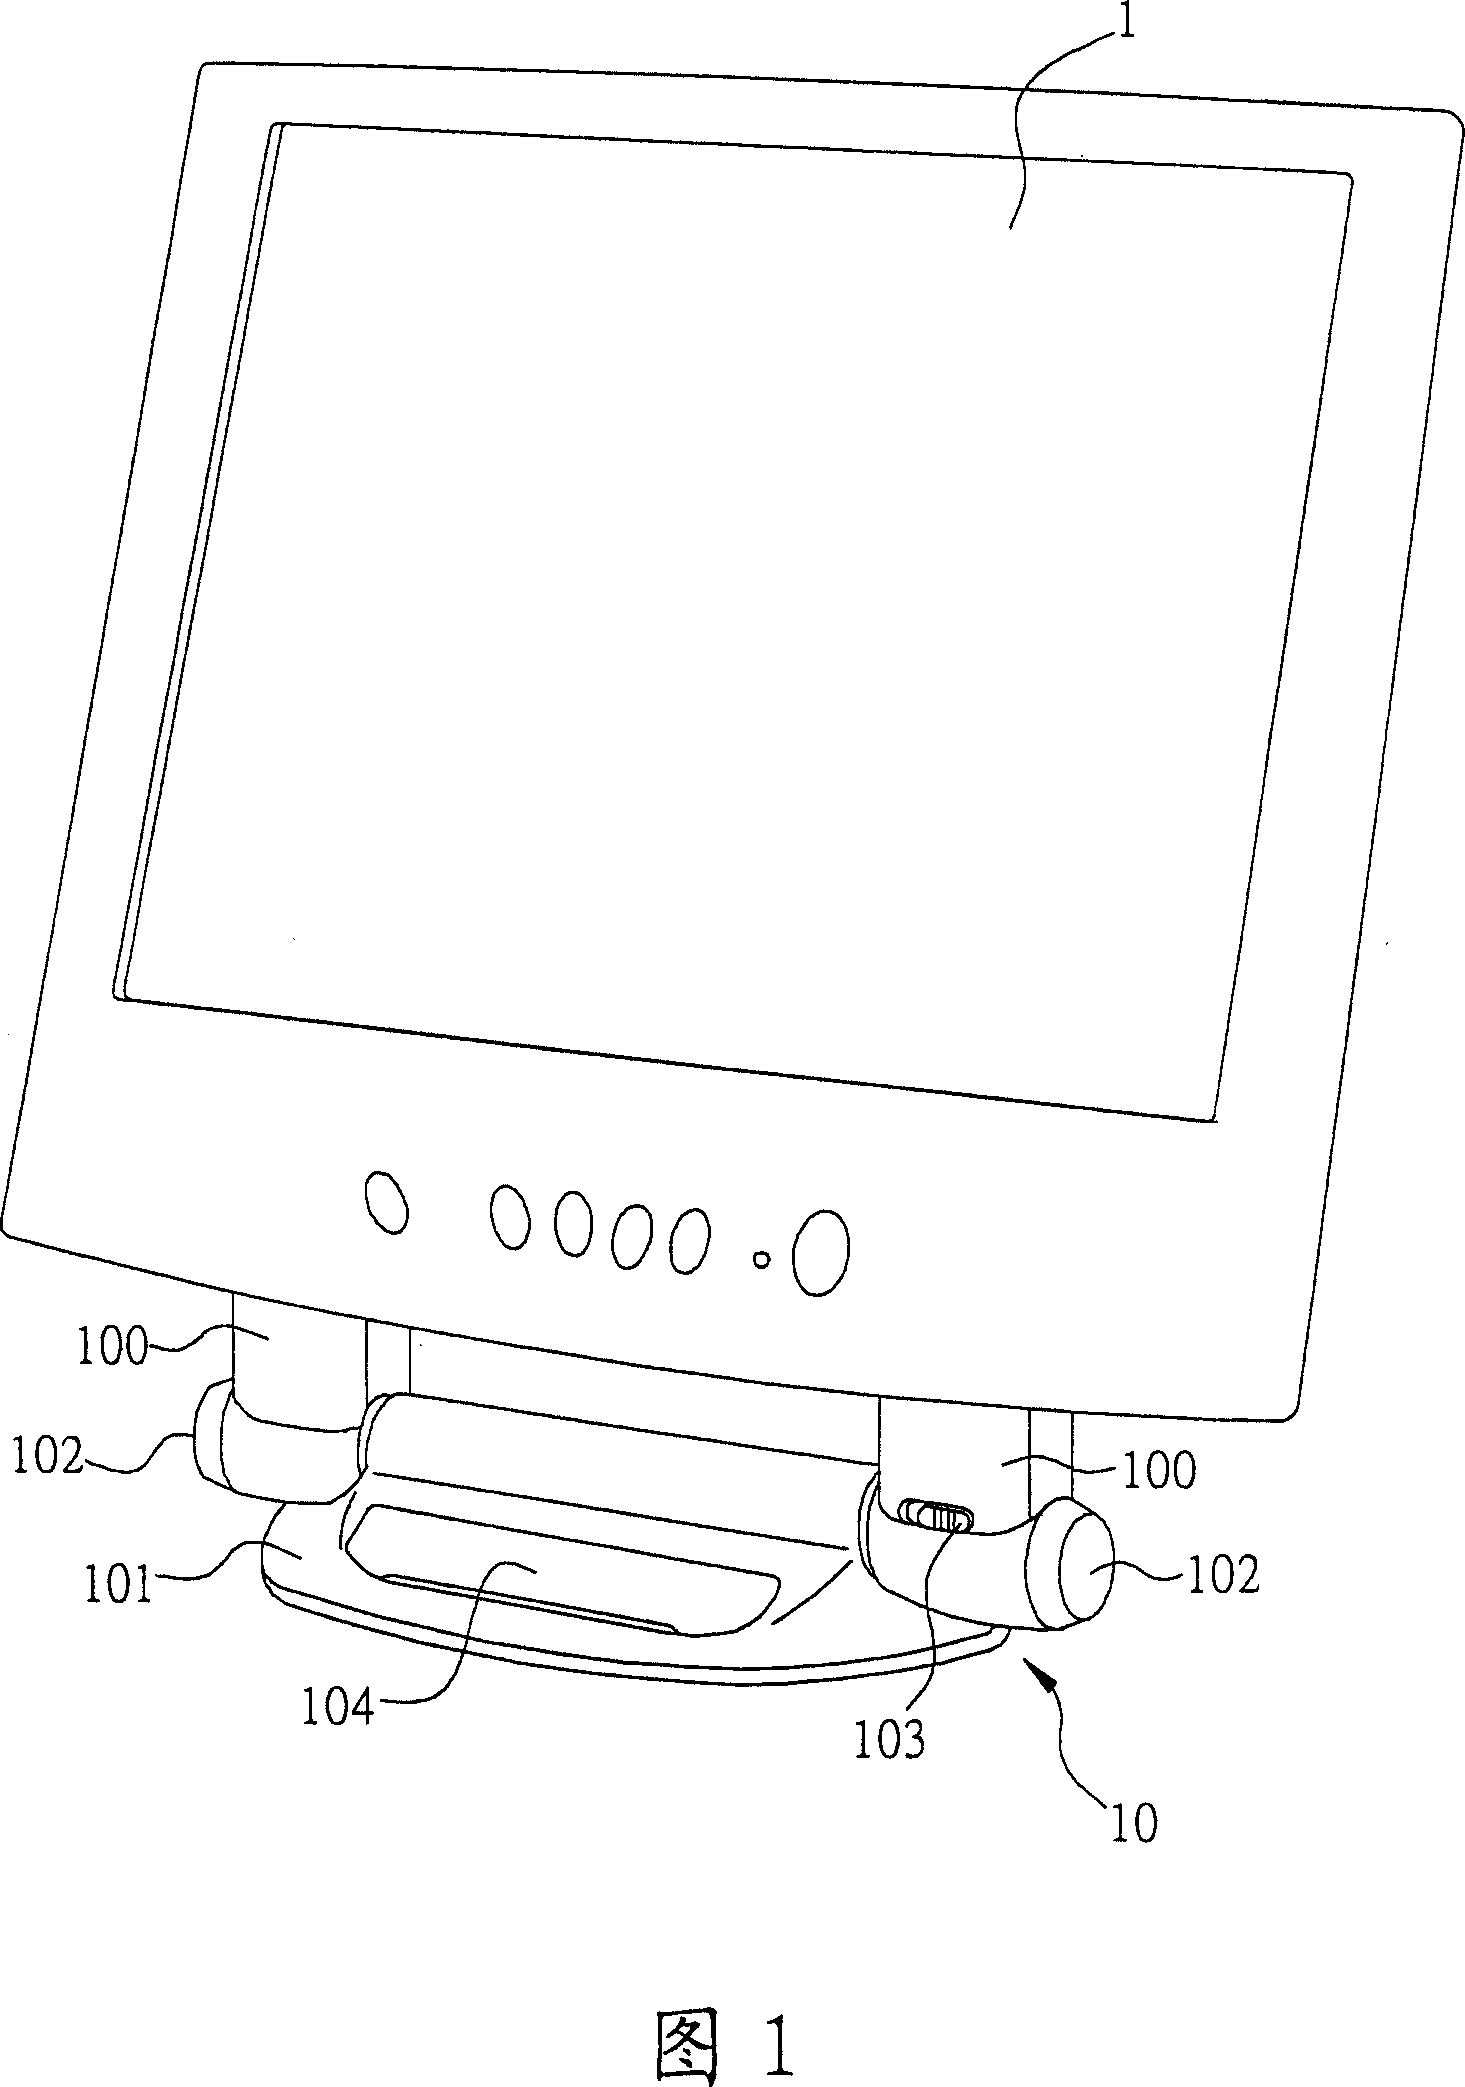 Electronic device capable of single hand hanging or flat placing